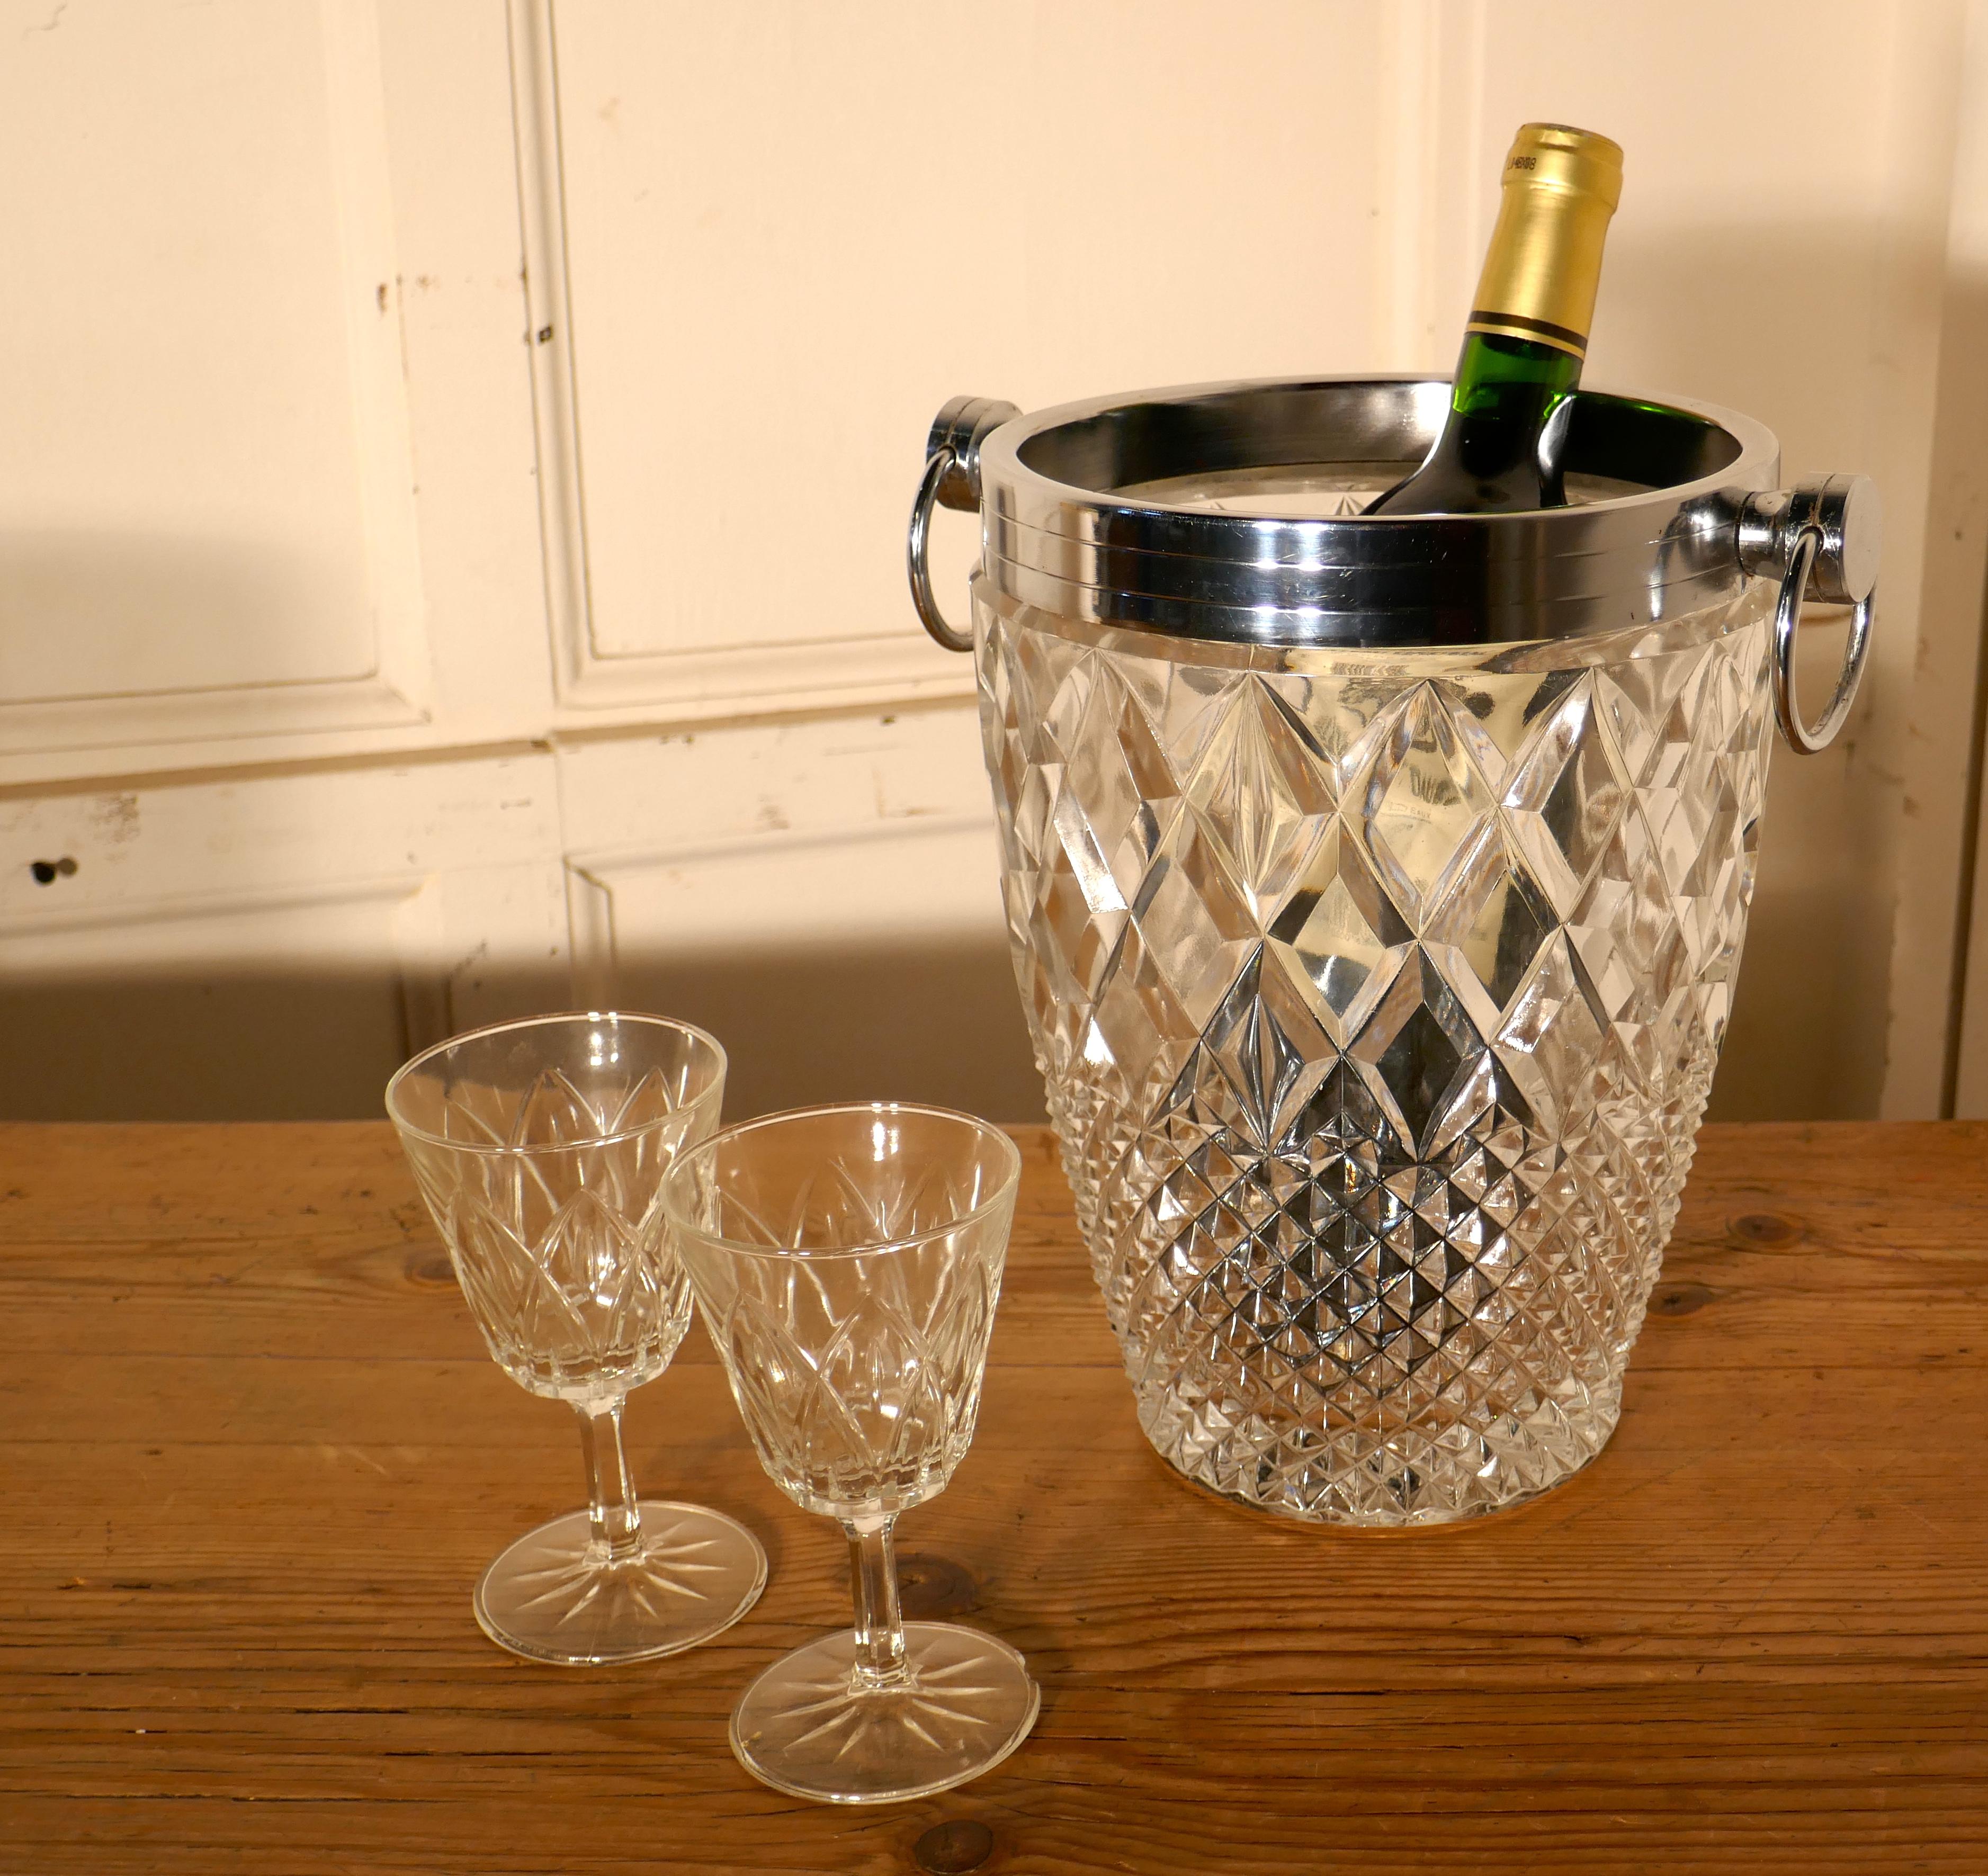 Art Deco diamond pattern champaign wine cooler


The cooler or ice bucket has a diamond pattern, with a chrome ring handled rim at the top

This ice bucket is heavy bottomed, it has been used but it is otherwise perfect 

The bucket is 10”